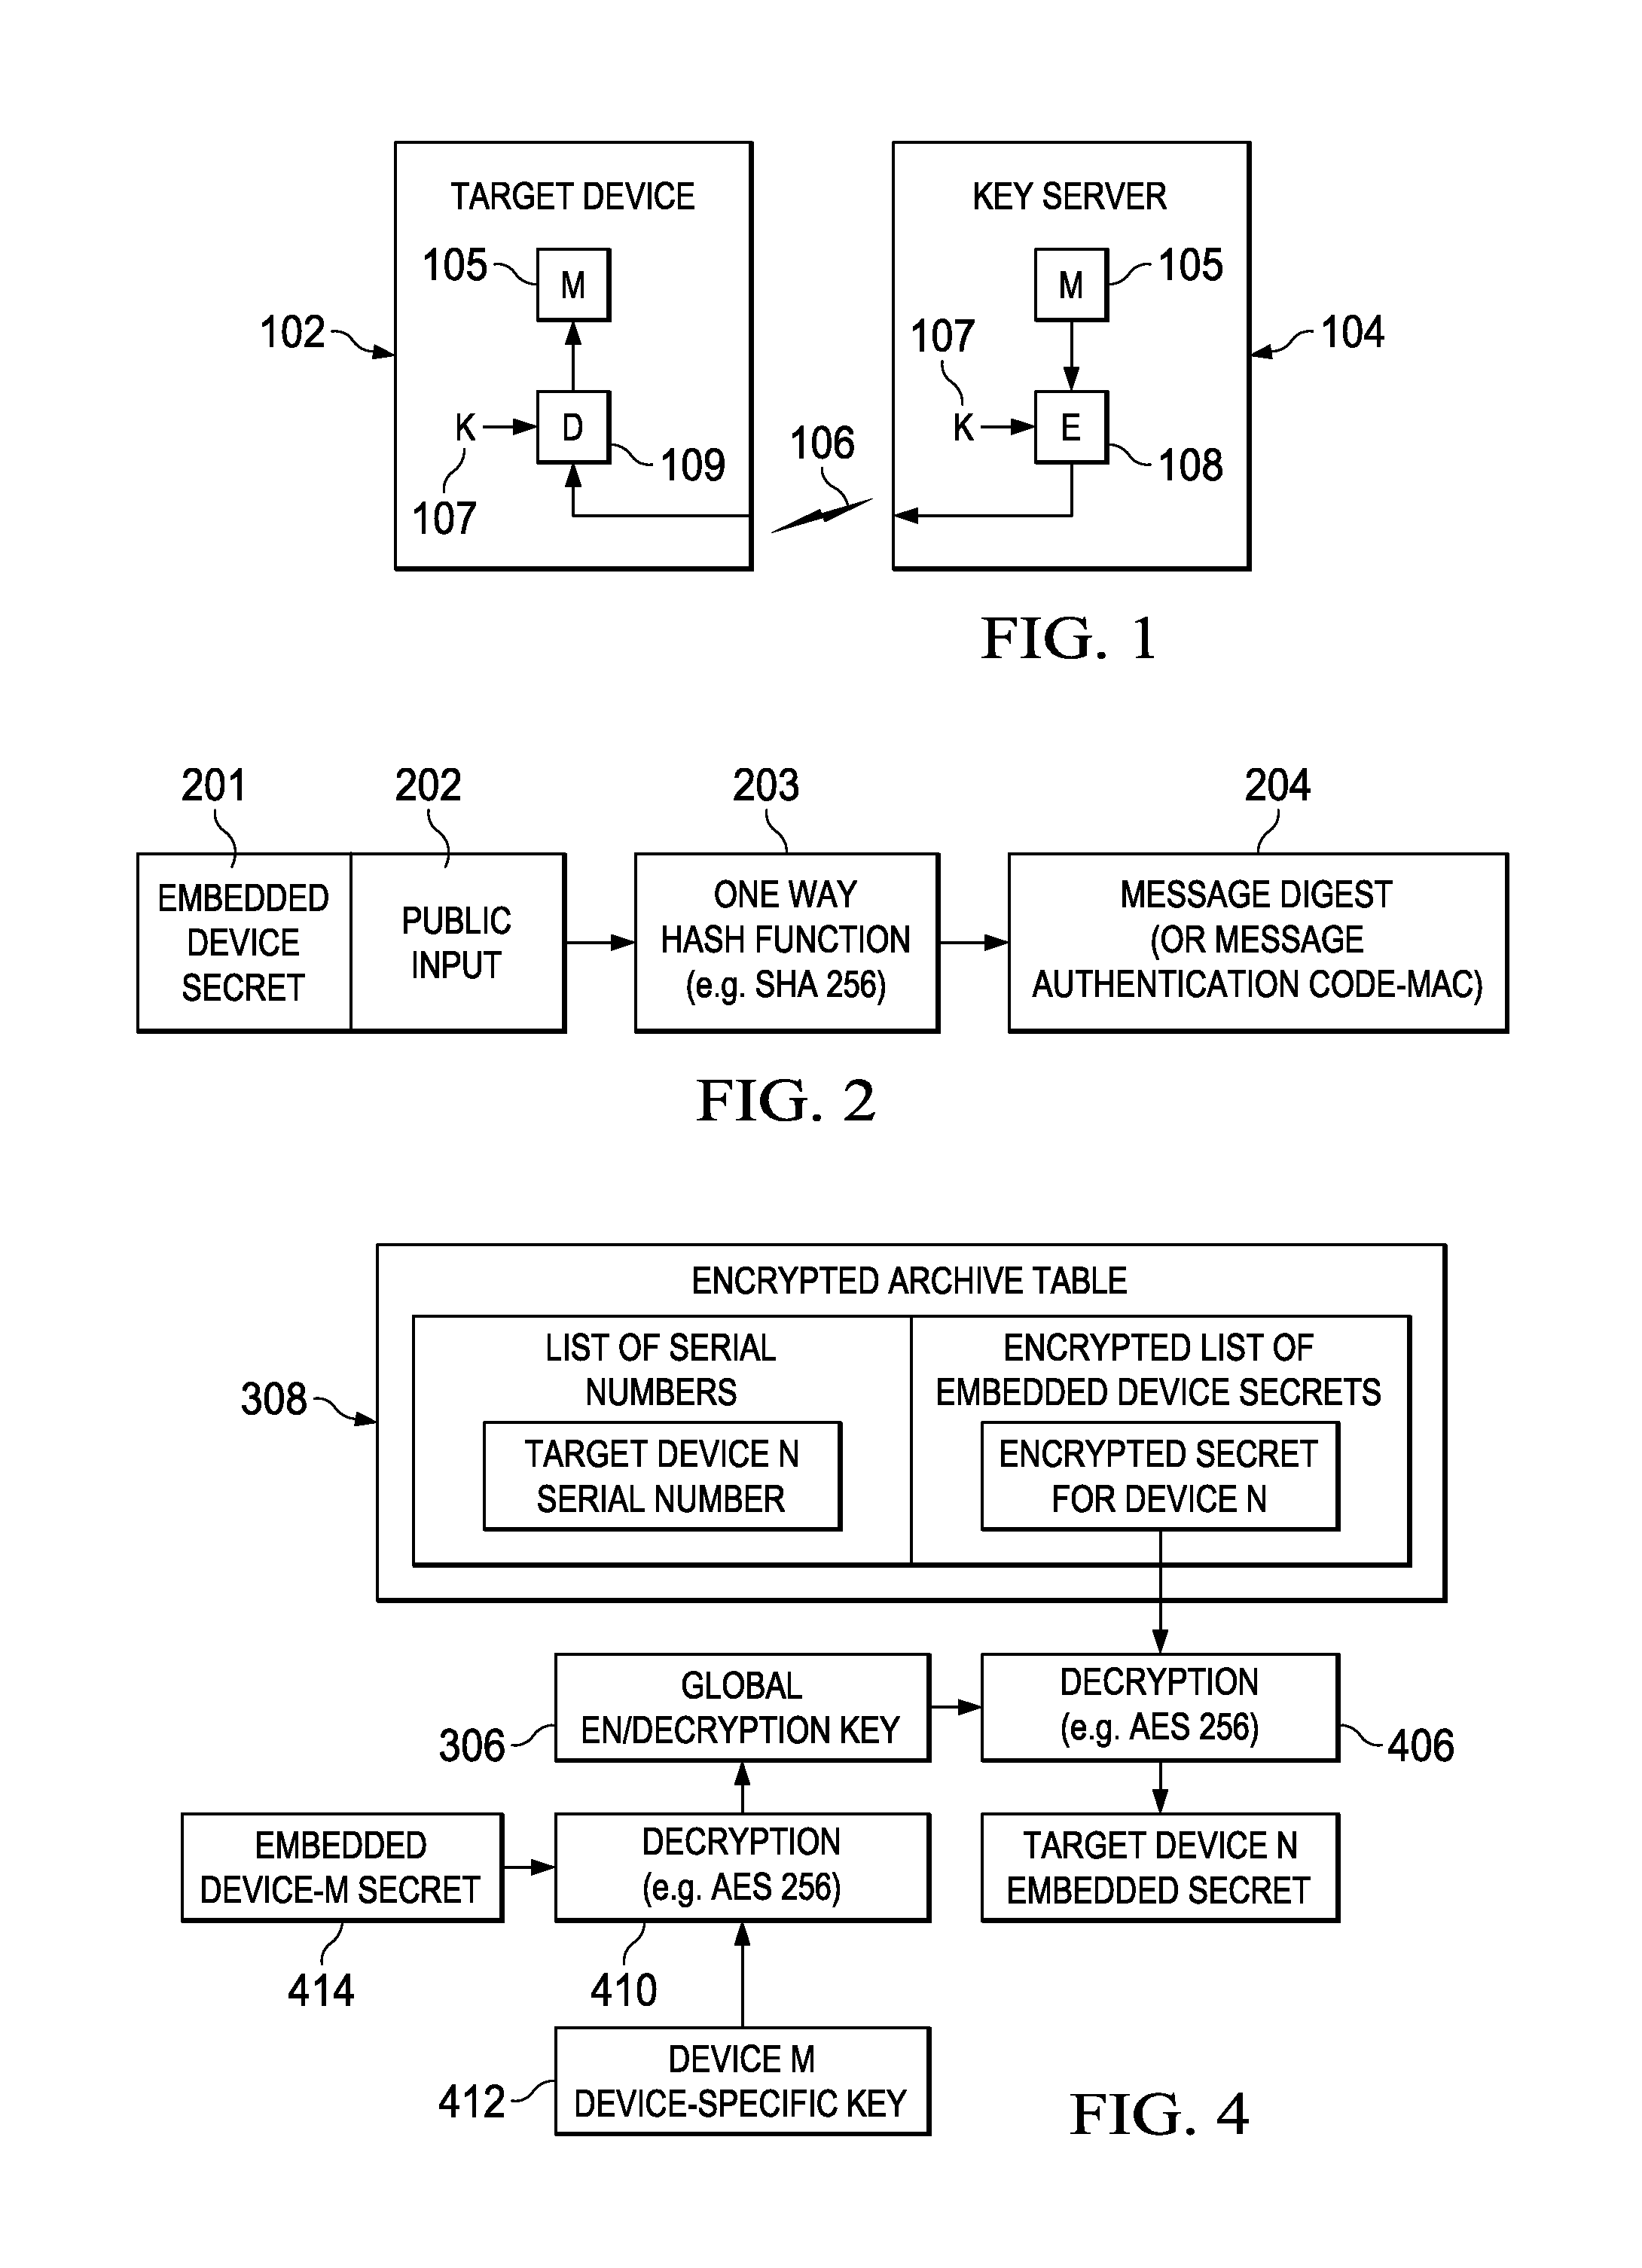 Systems and methods for establishing and using distributed key servers